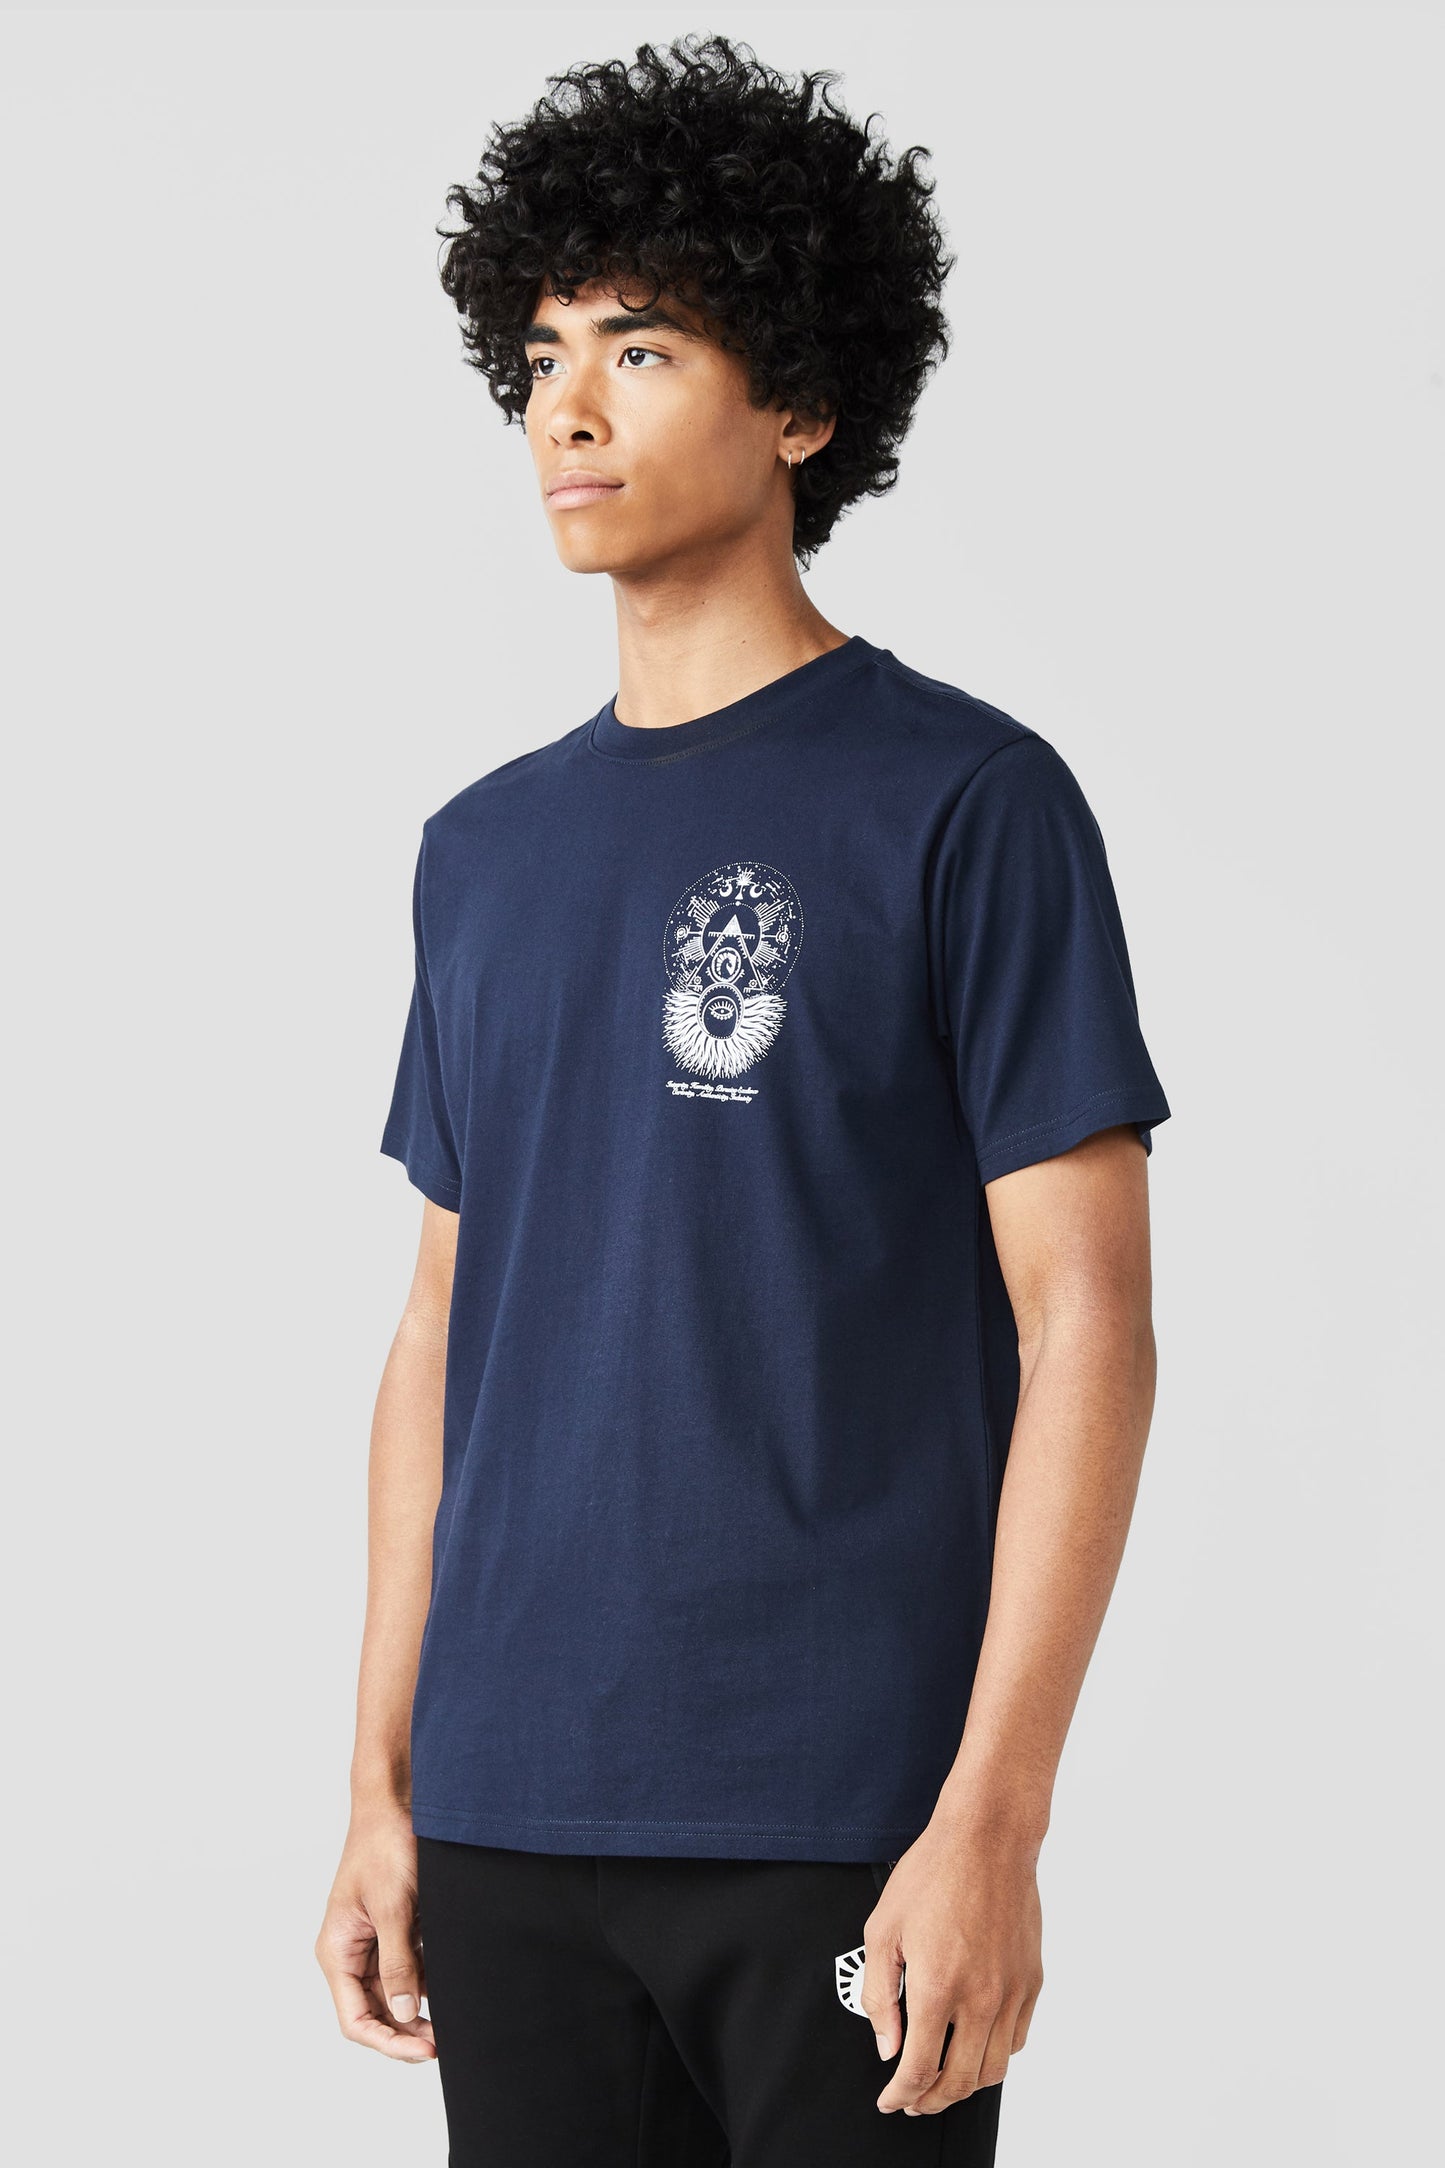 PECULIARLY PASSIONATE SHORT SLEEVE TEE